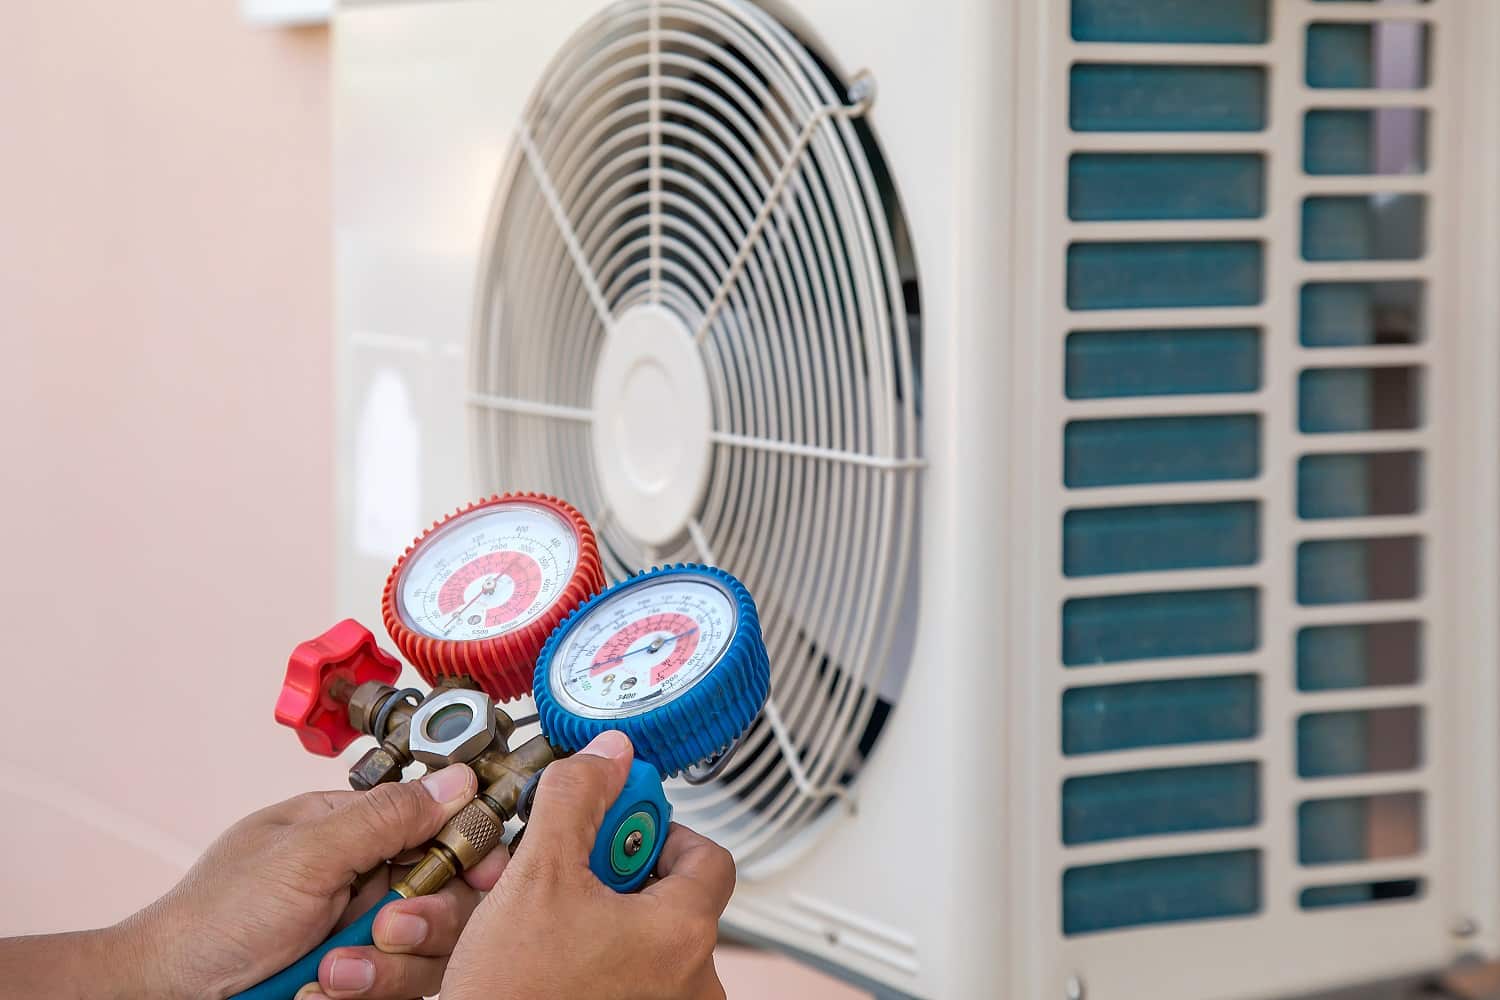 Mechanic air repair using manifold gauge for filling home air conditioner and checking maintenance outdoor air compressor unit.